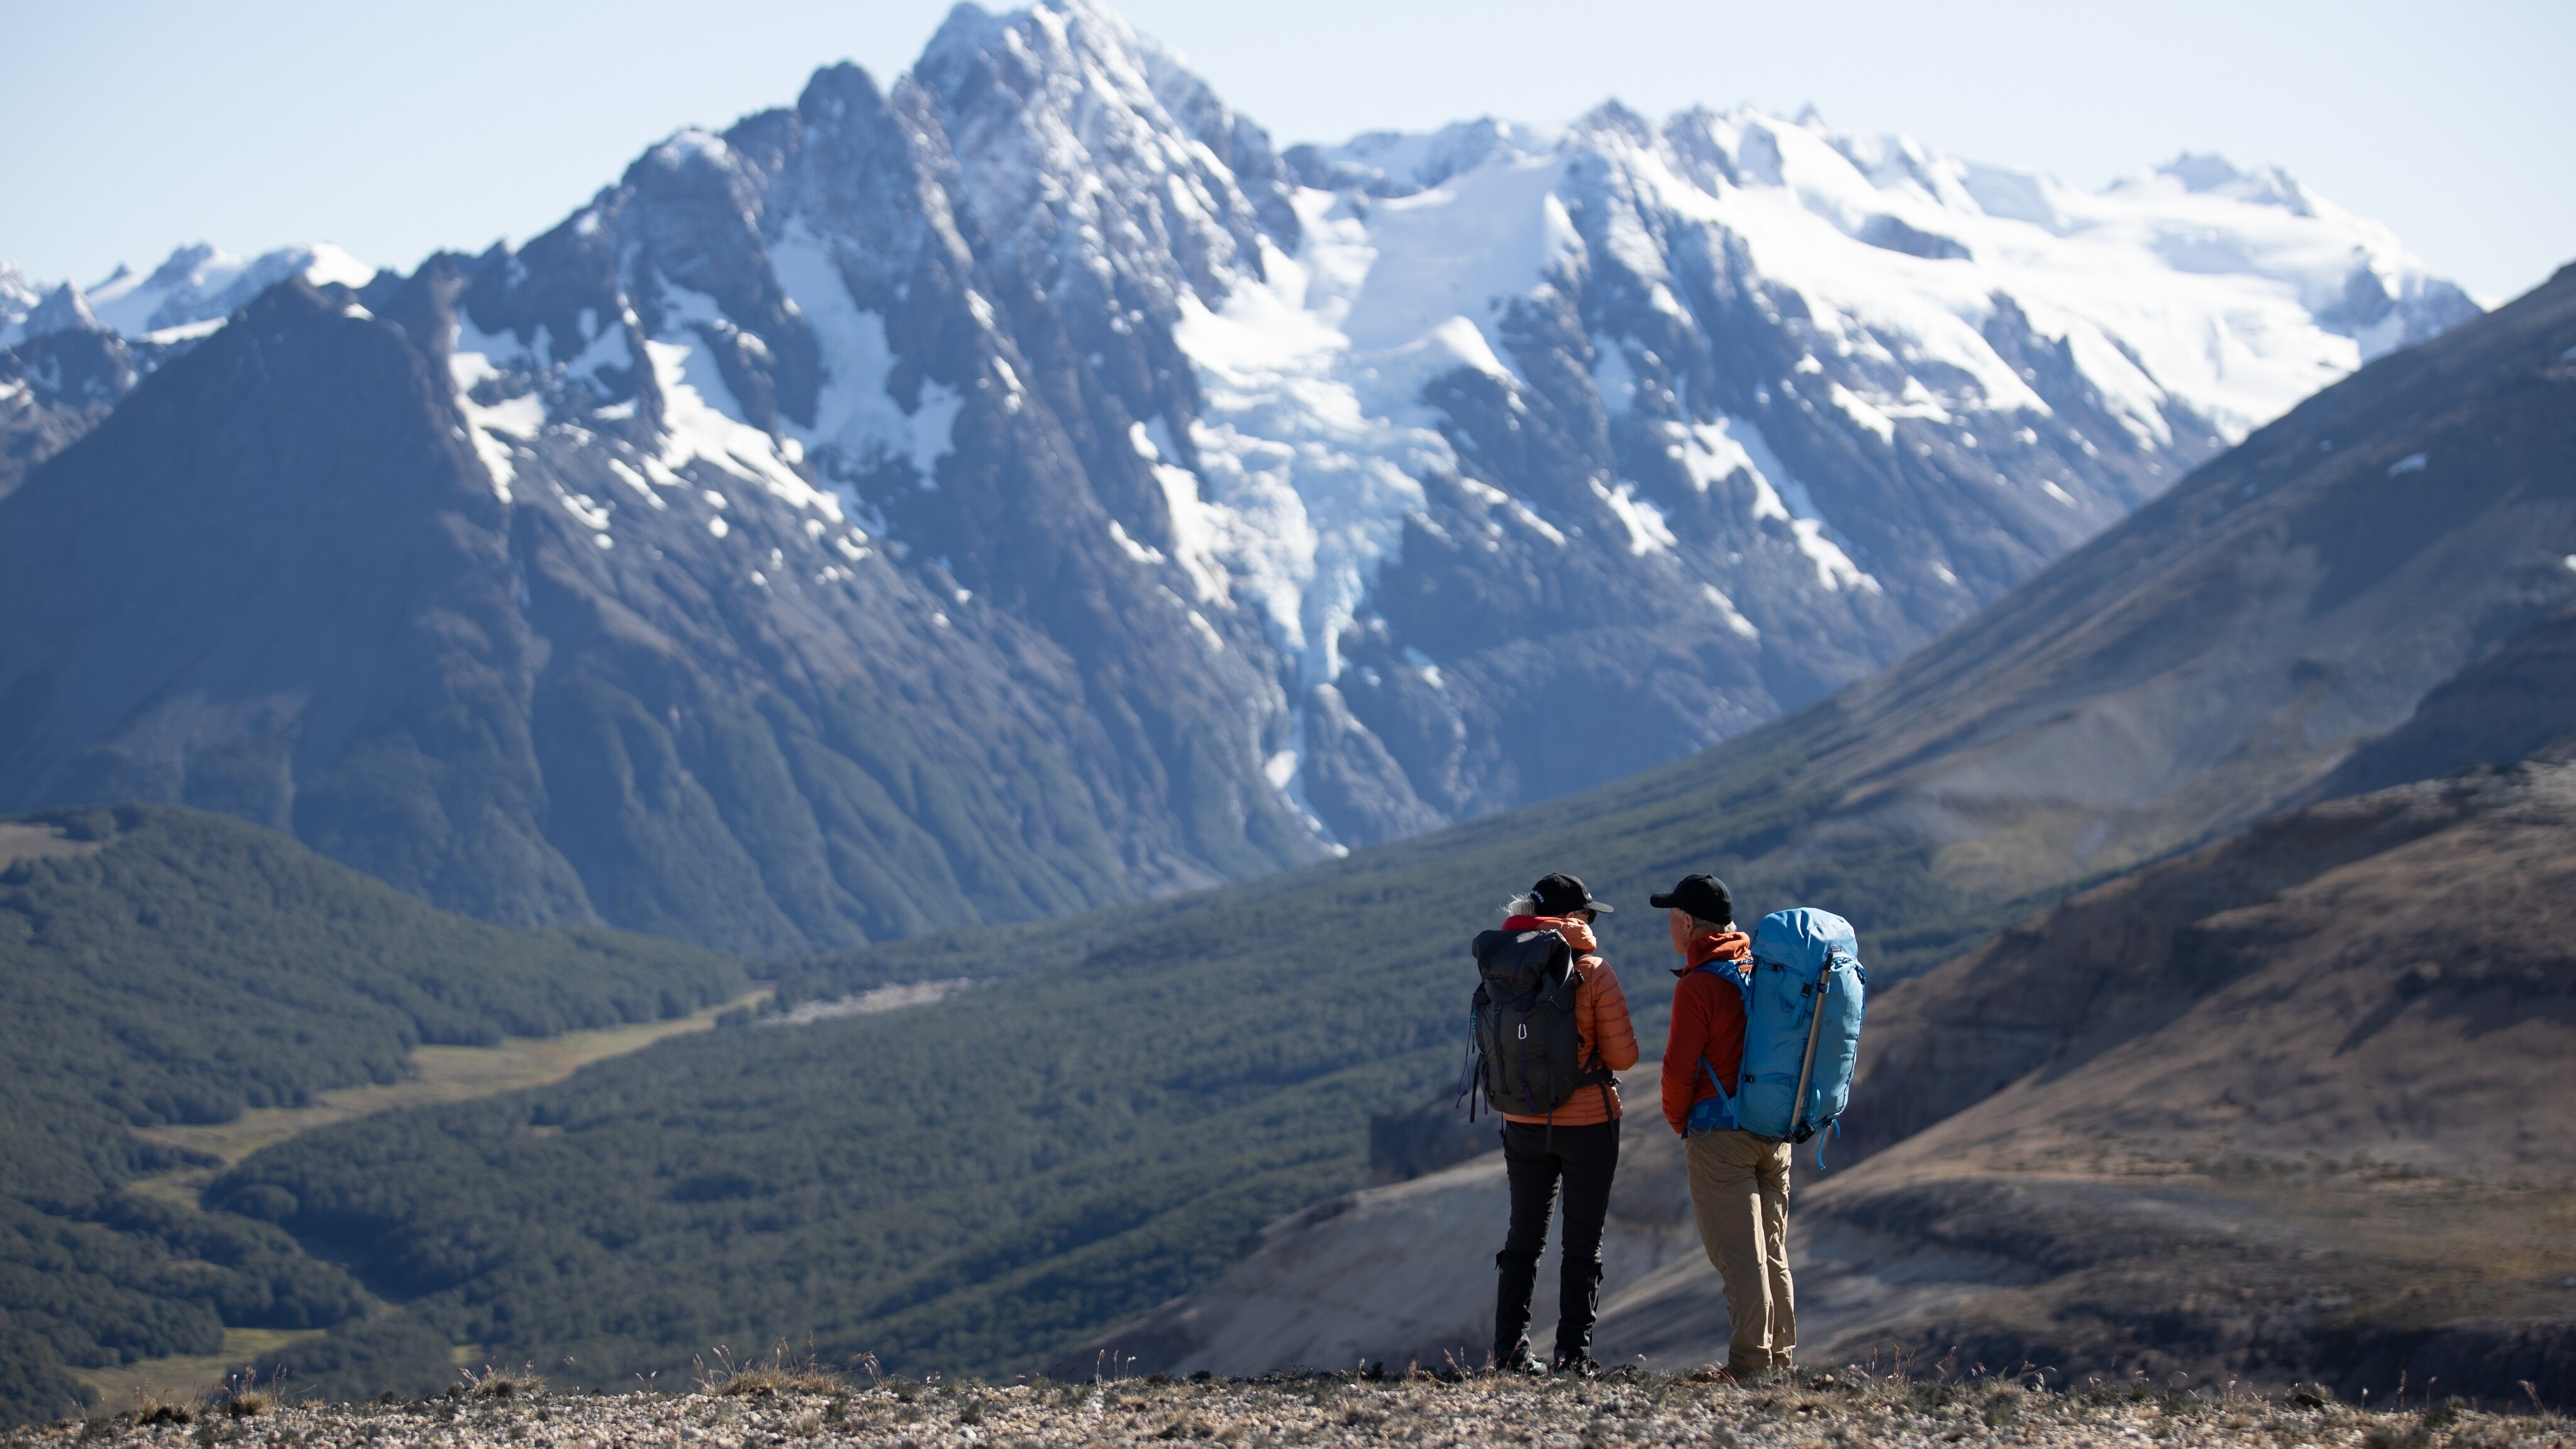 Kris Tompkins and Rick Ridgeway talking and looking out towards mountainous landscape. (Jimmy Chin)